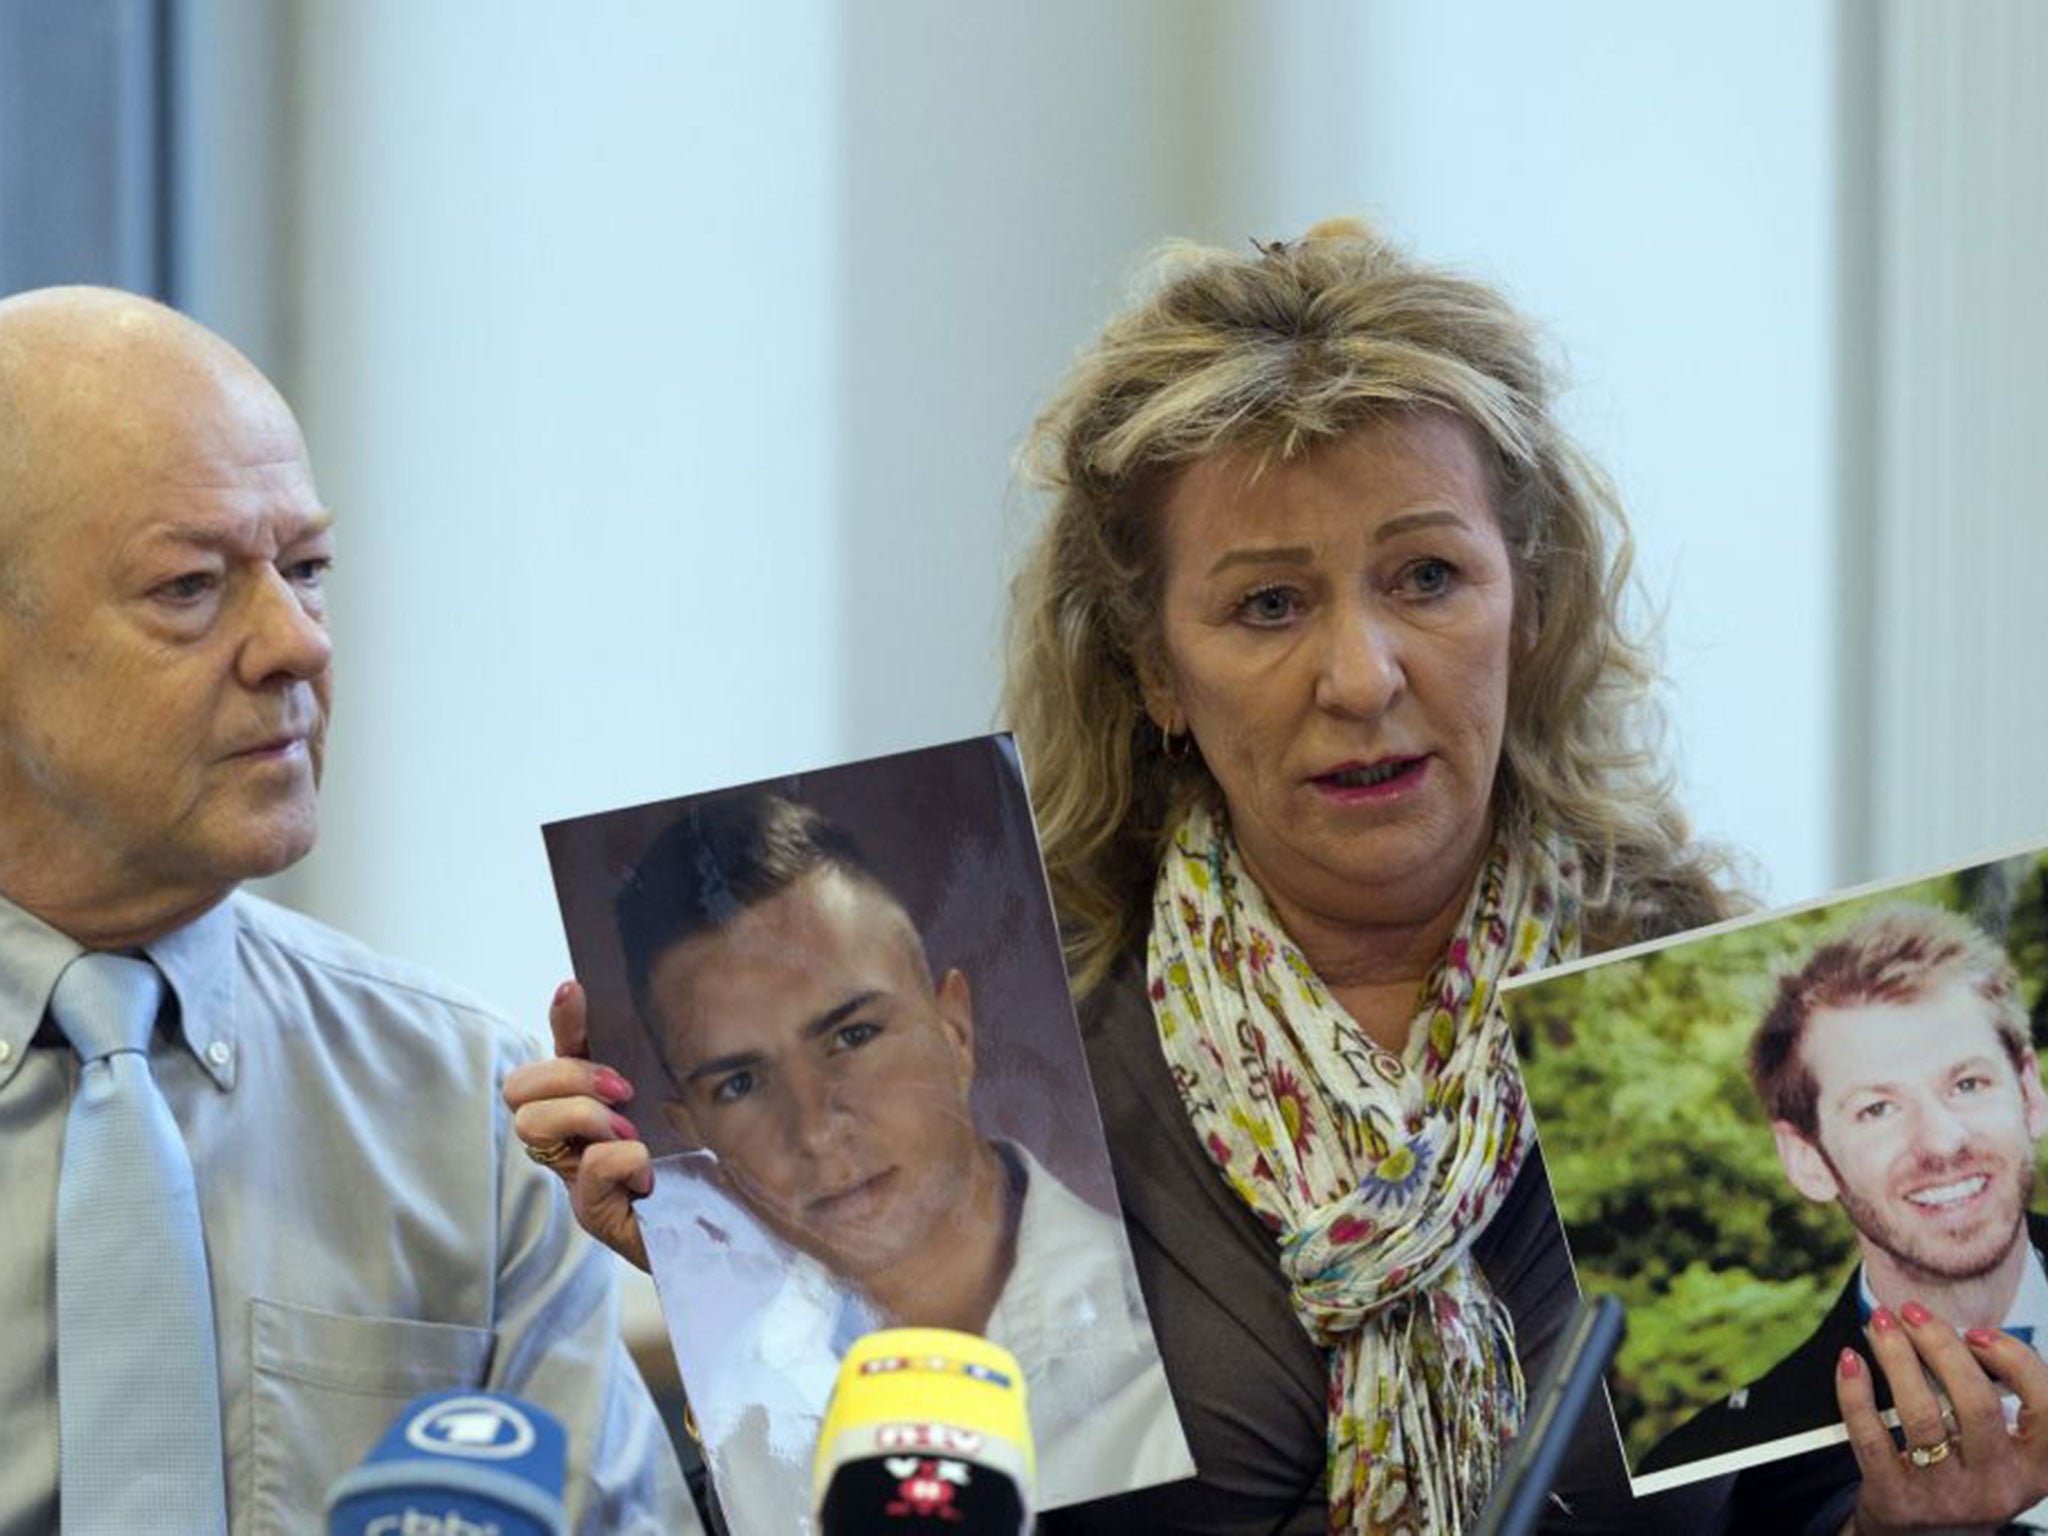 Phil and Rita Holland with photographs of their murdered son, Luke, right, and Burak Bektas, whom they believe was killed by the same man